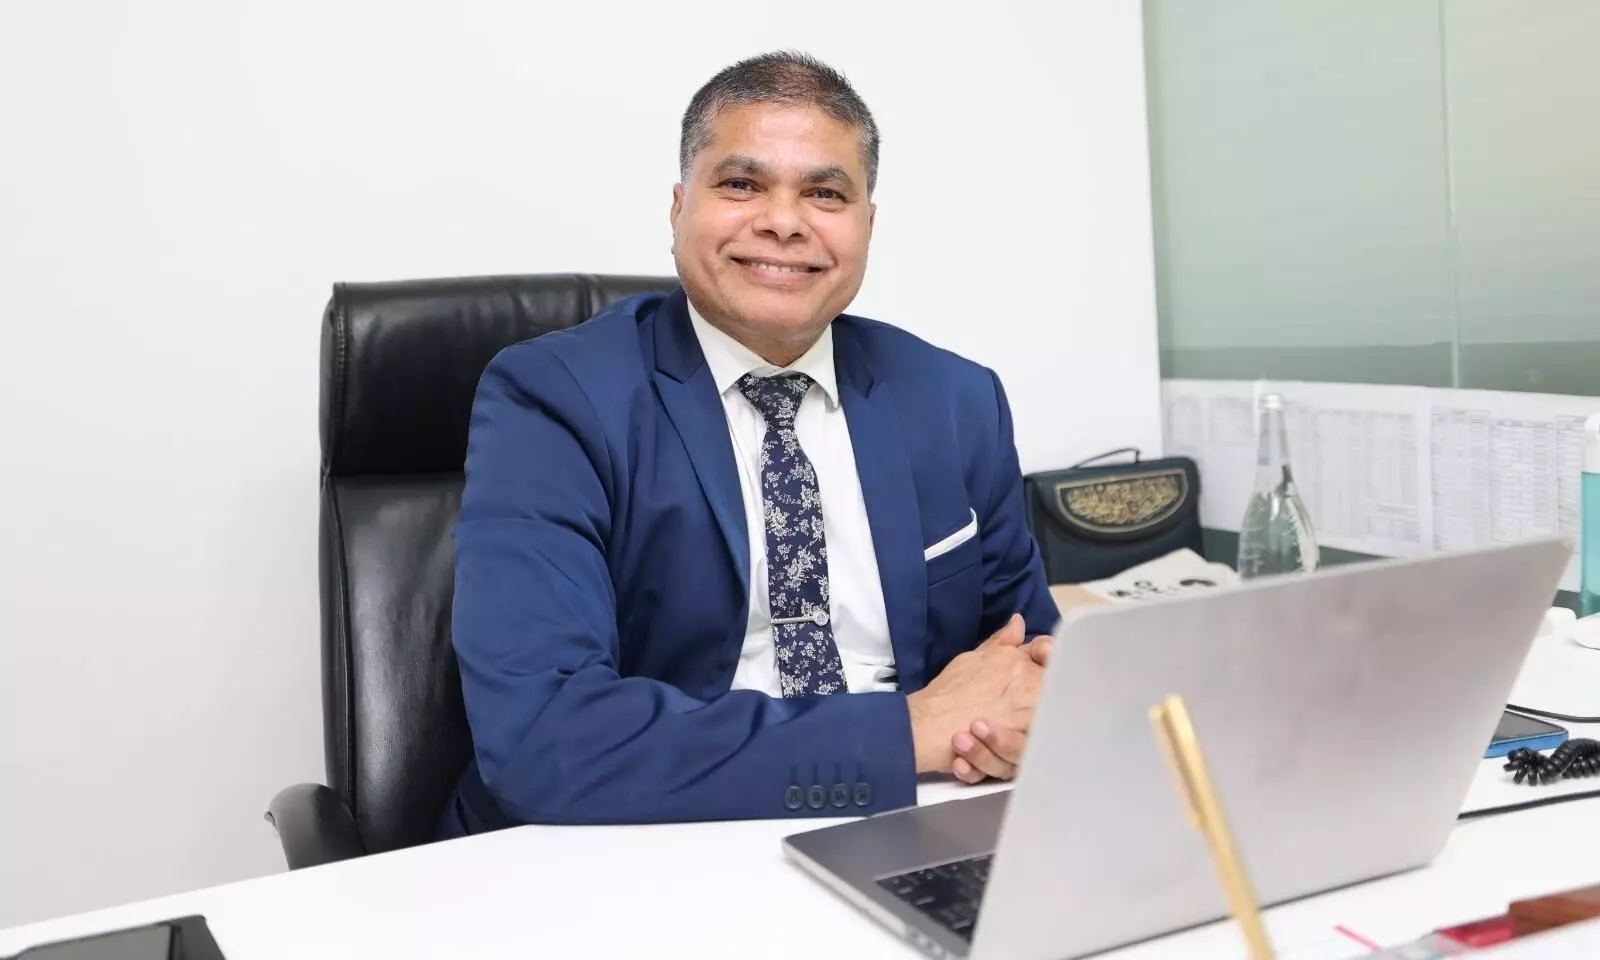 Omar Ali: From humble beginnings to remarkable success